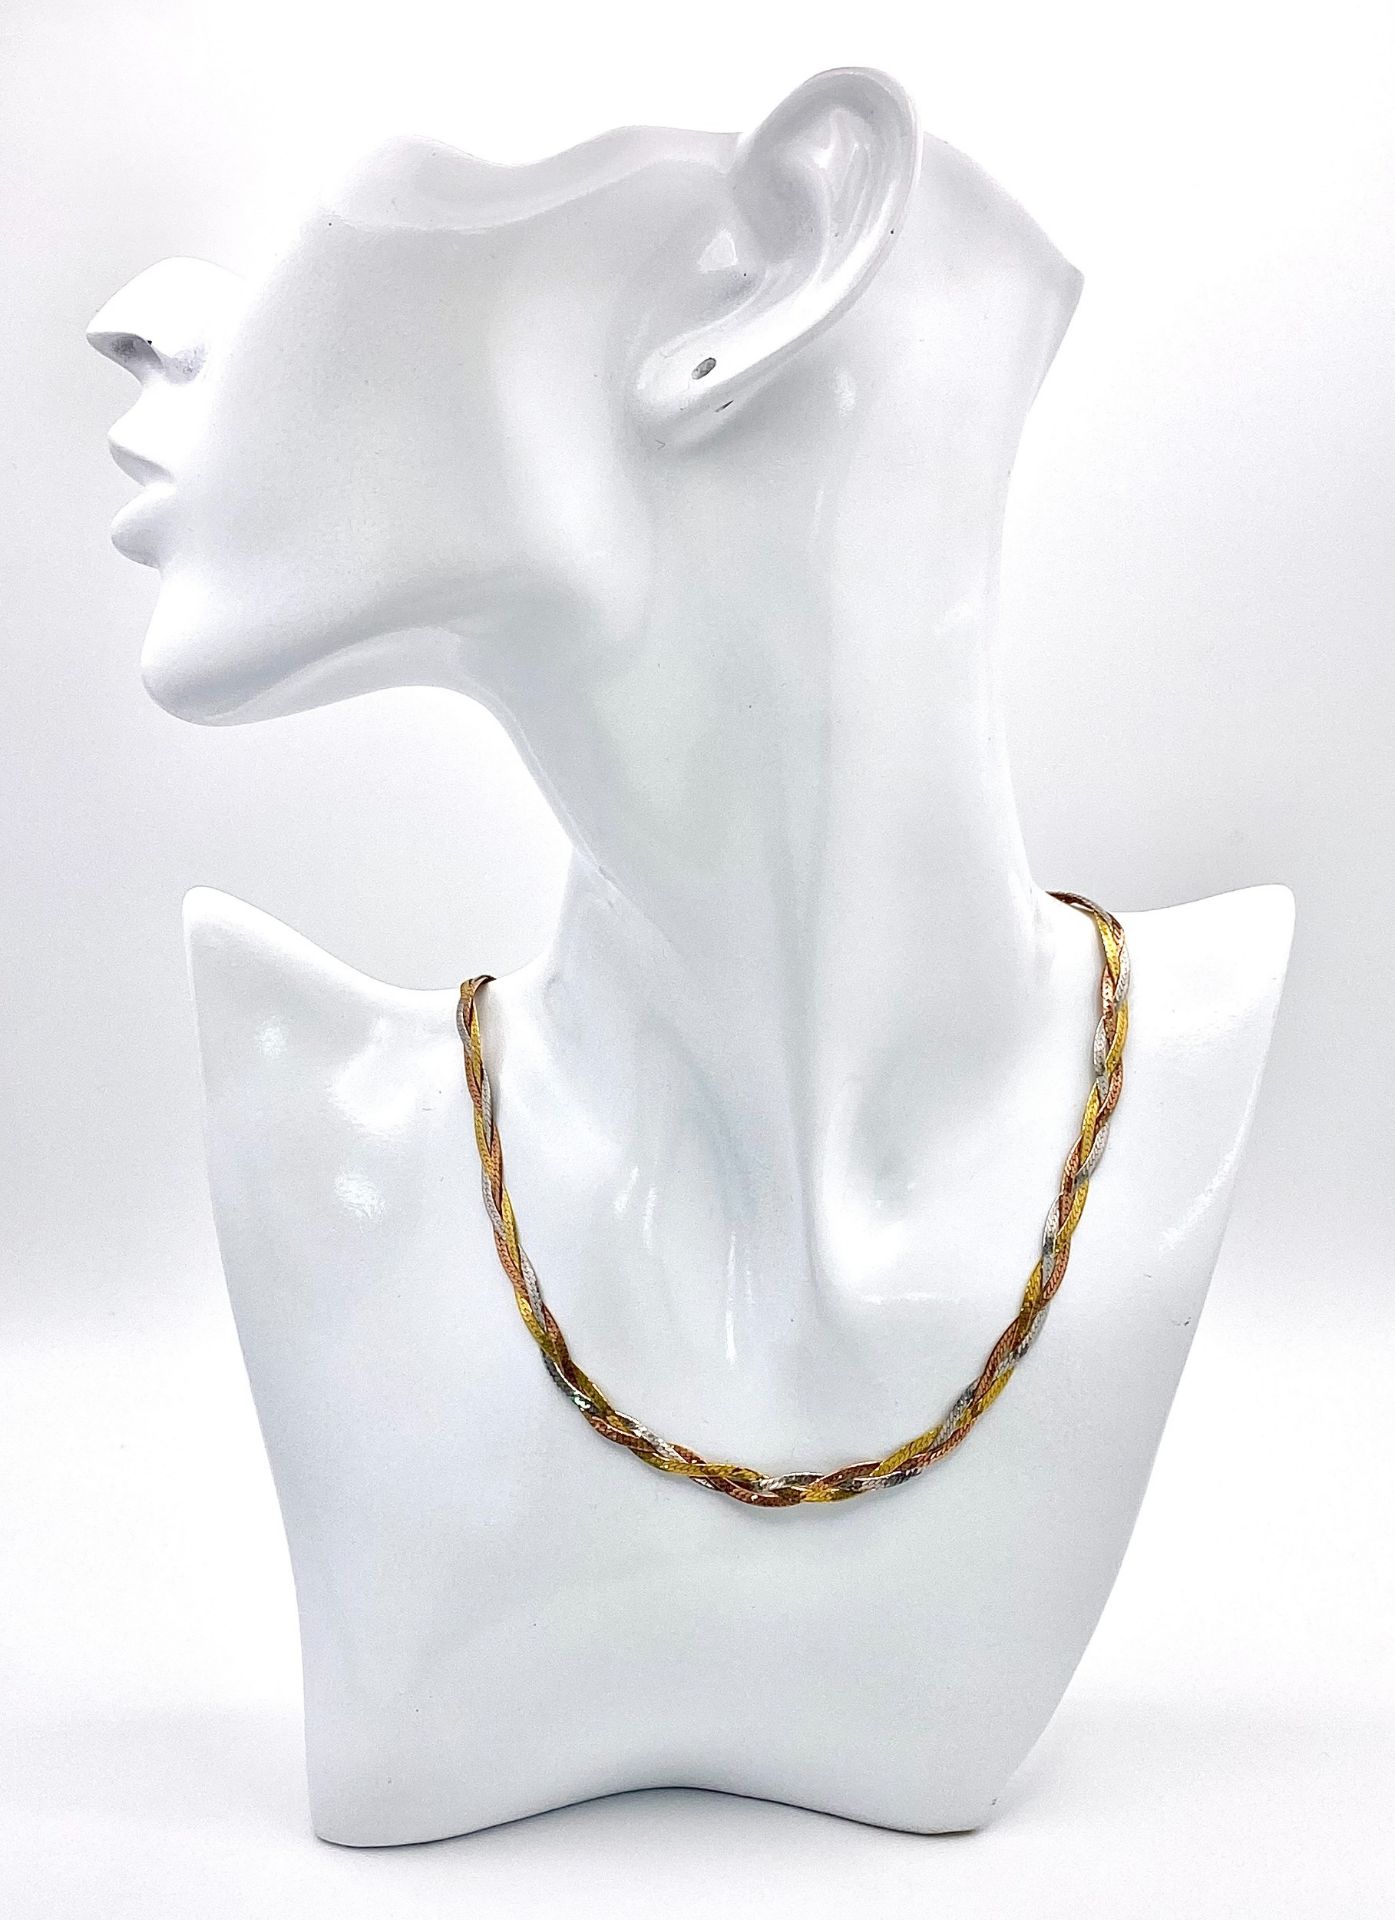 A 9K Tri-Colour Gold Entwined Flat Necklace. 44cm. 7.6g weight - Image 2 of 4